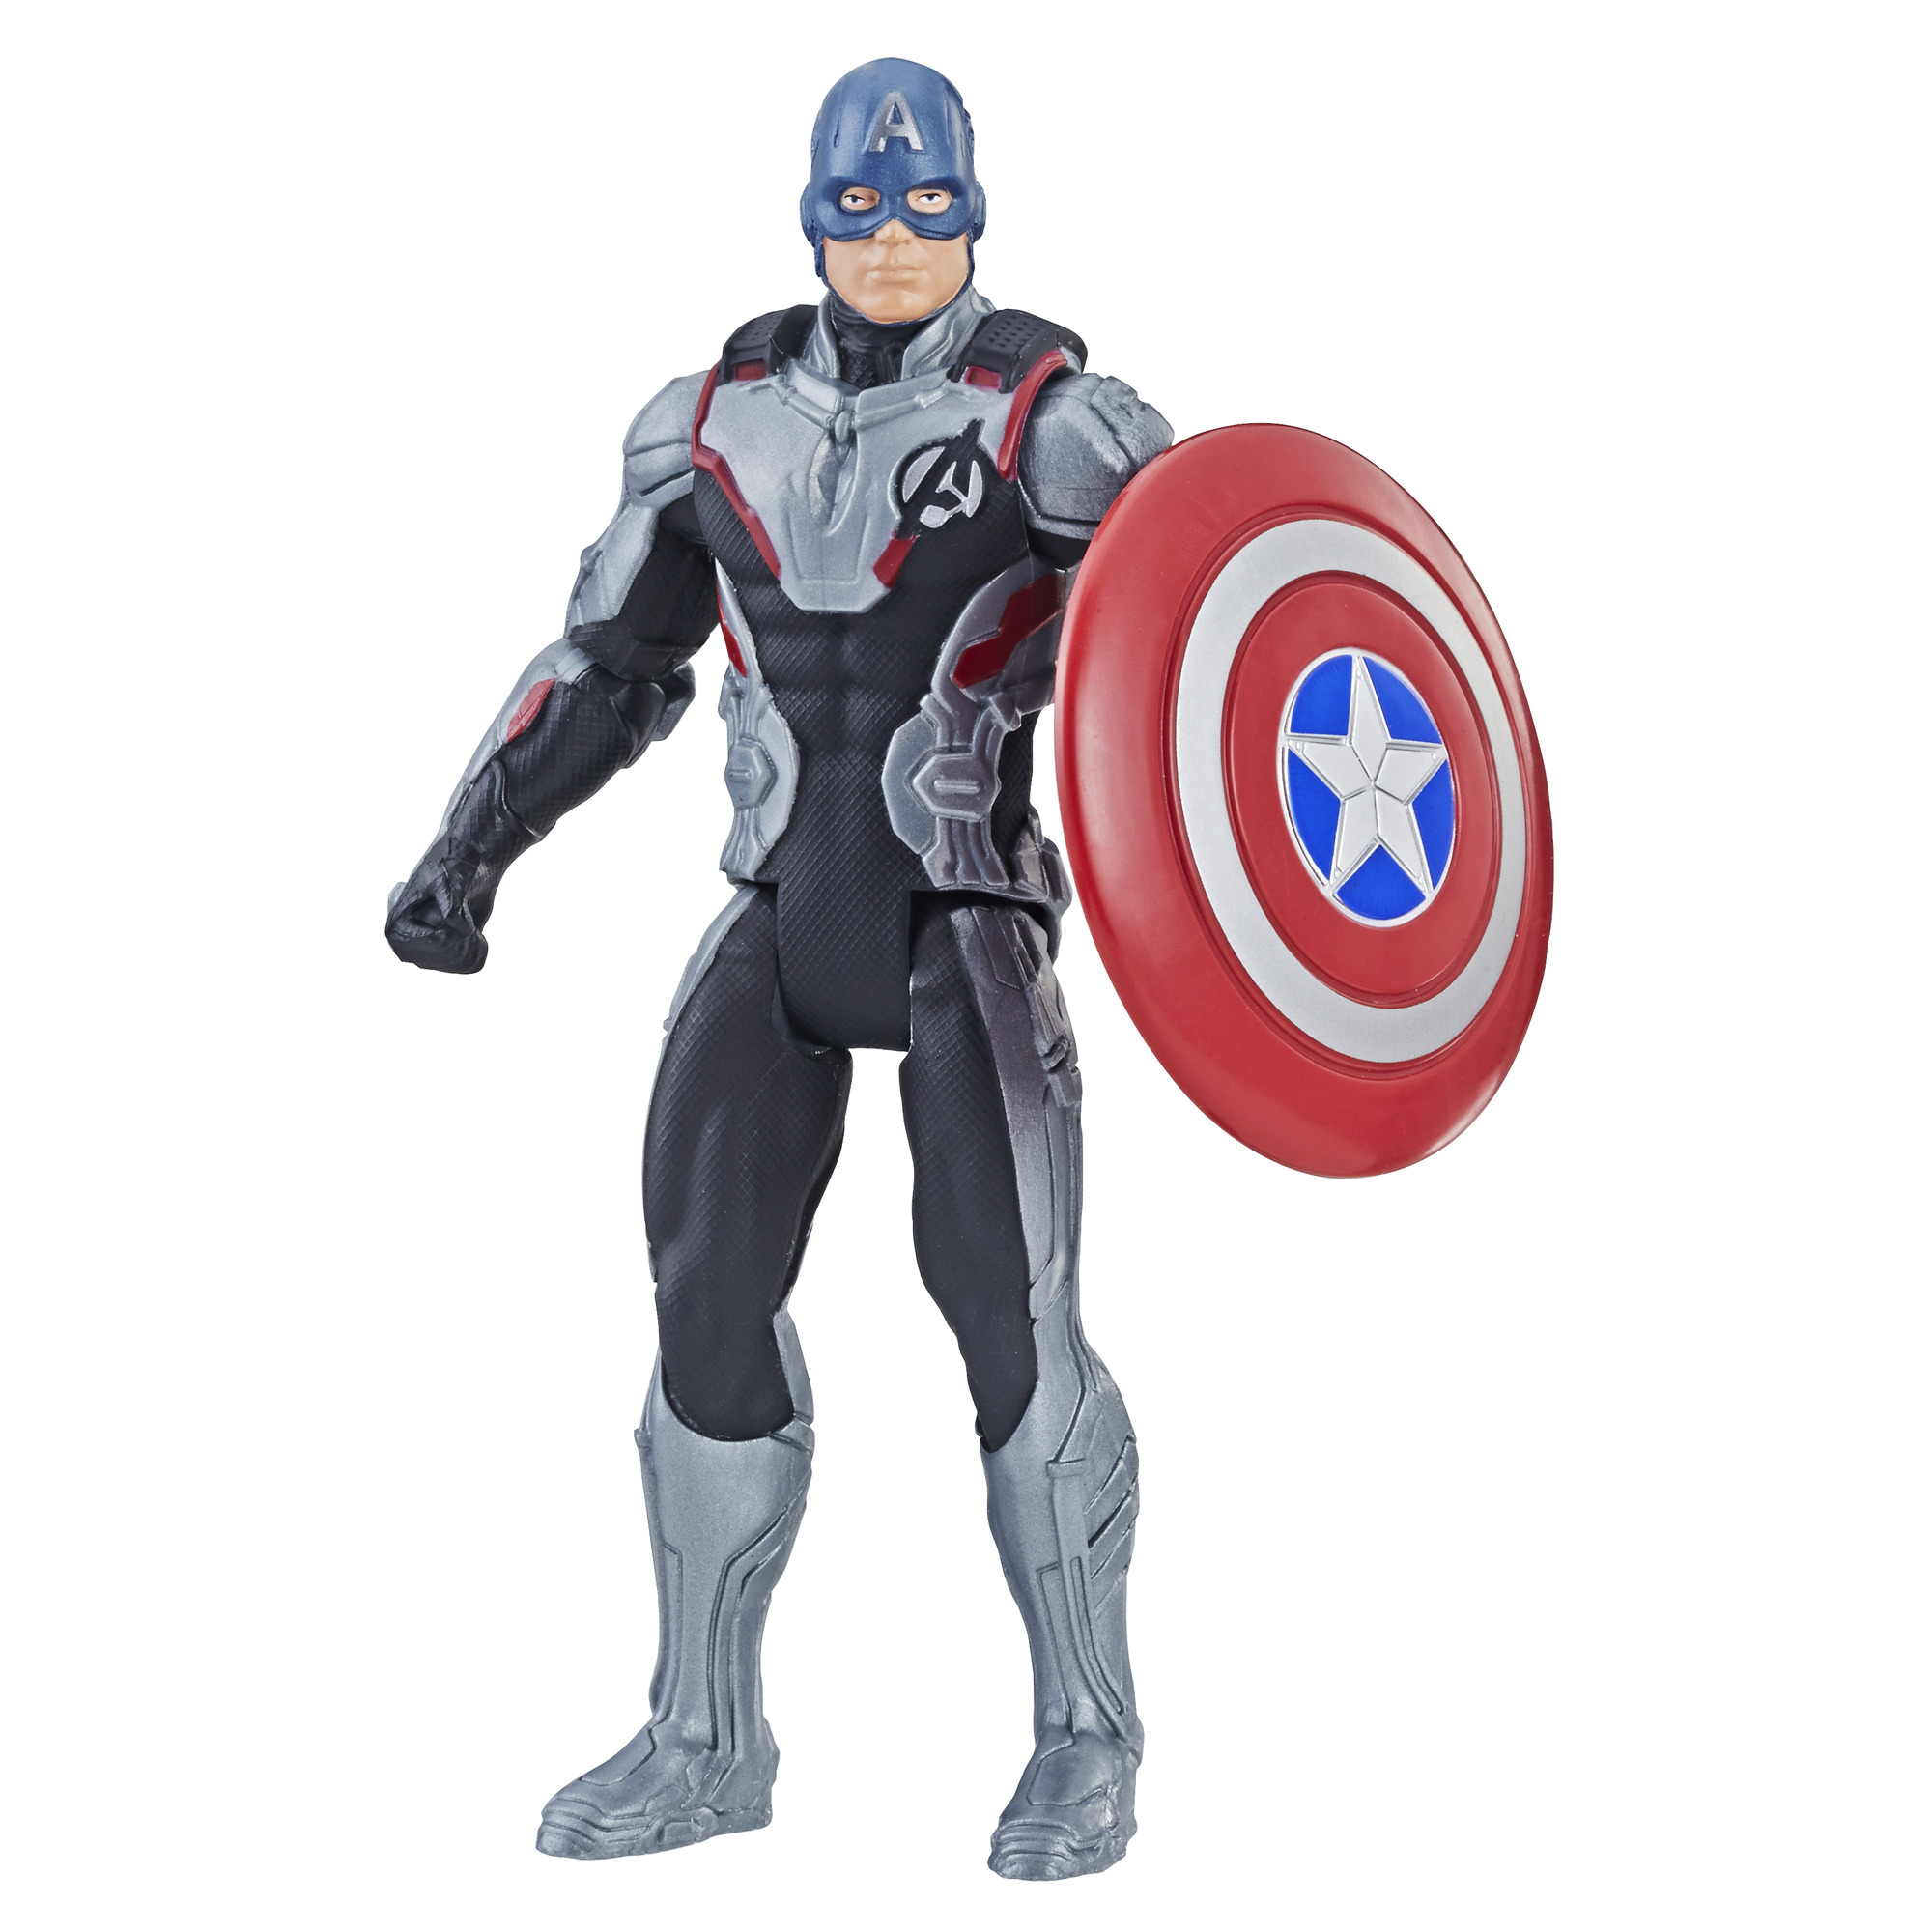 Avengers Marvel Captain America 6-in Basic Action Figure with Iconic Shield NEW!